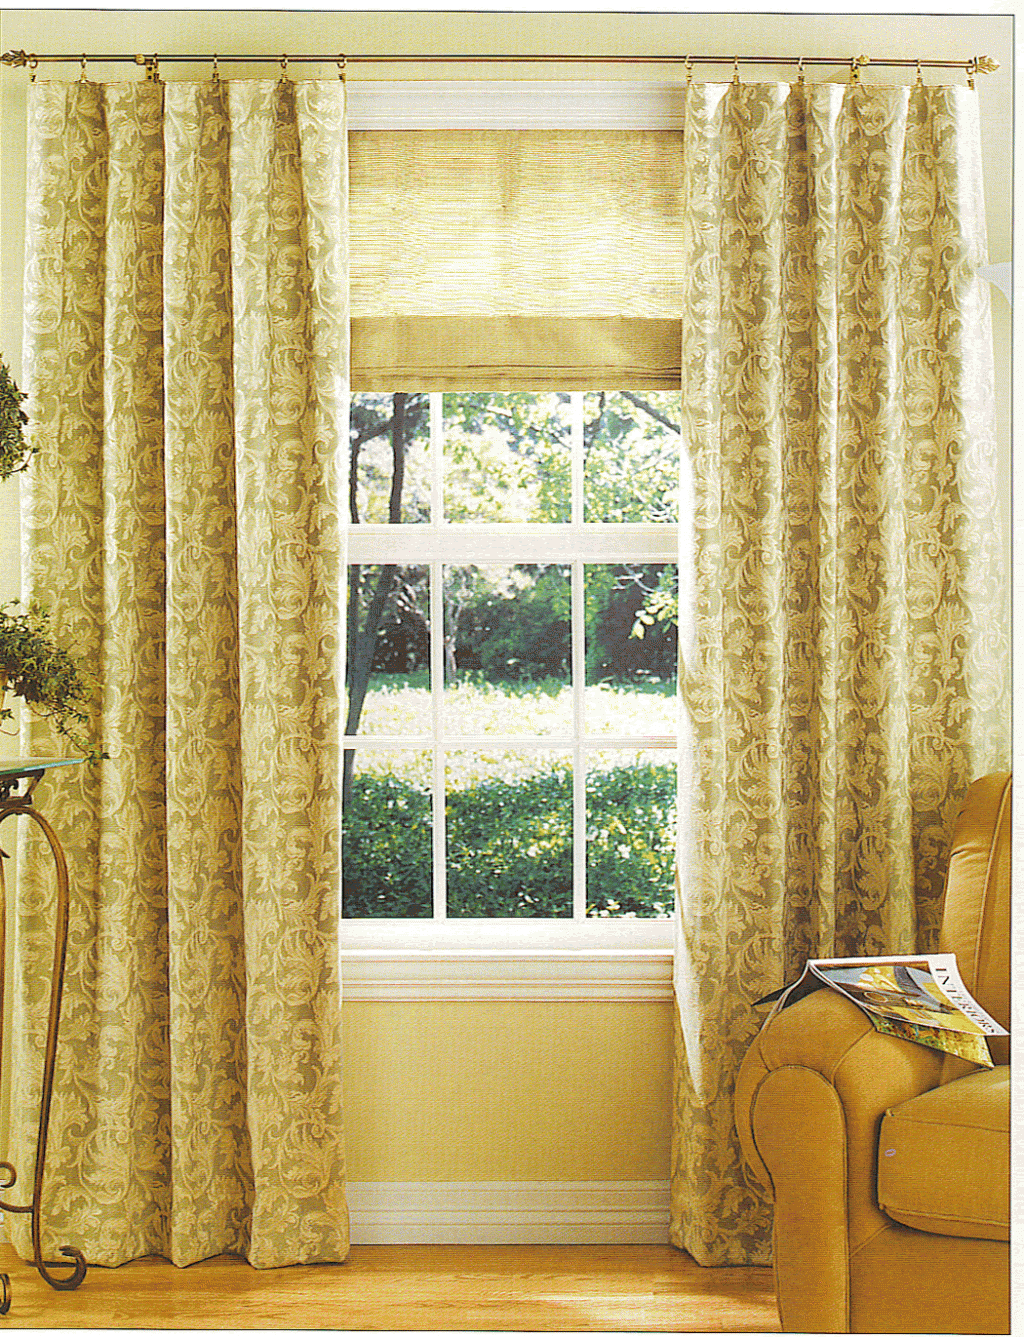 Curtains Styles in Curtain